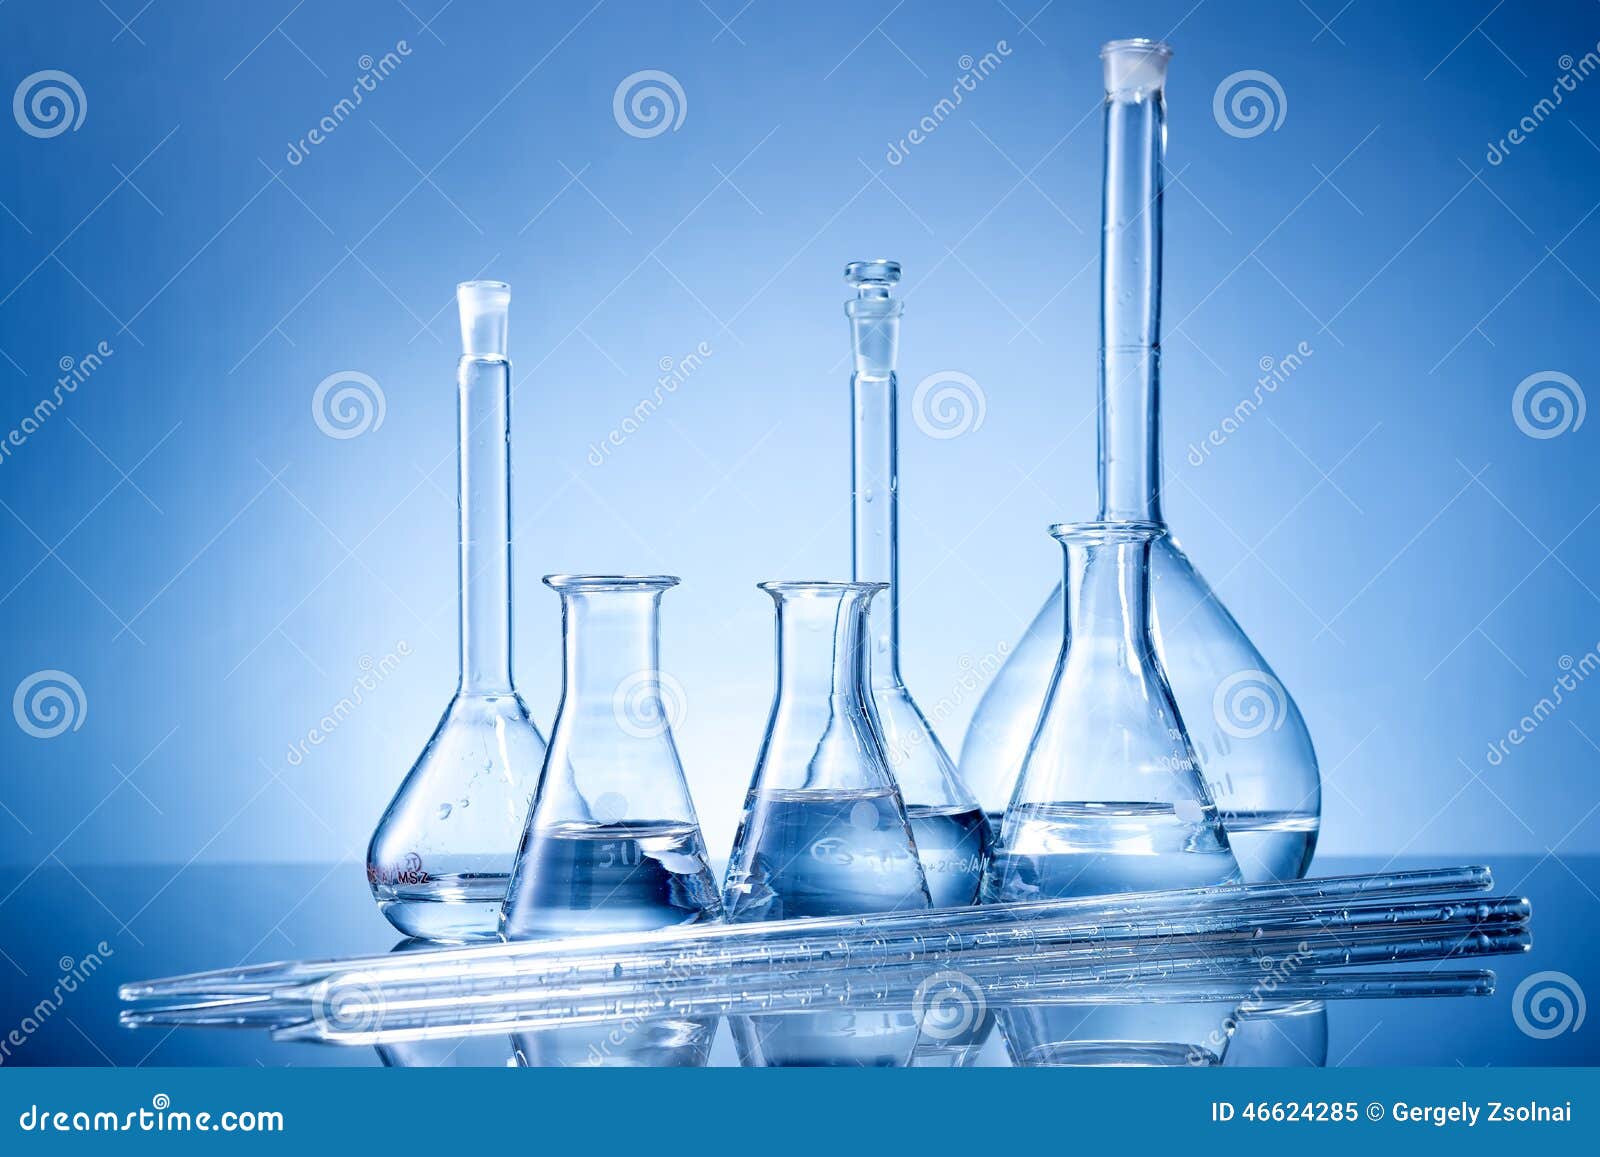 laboratory equipment, glass flasks, pipettes on blue background